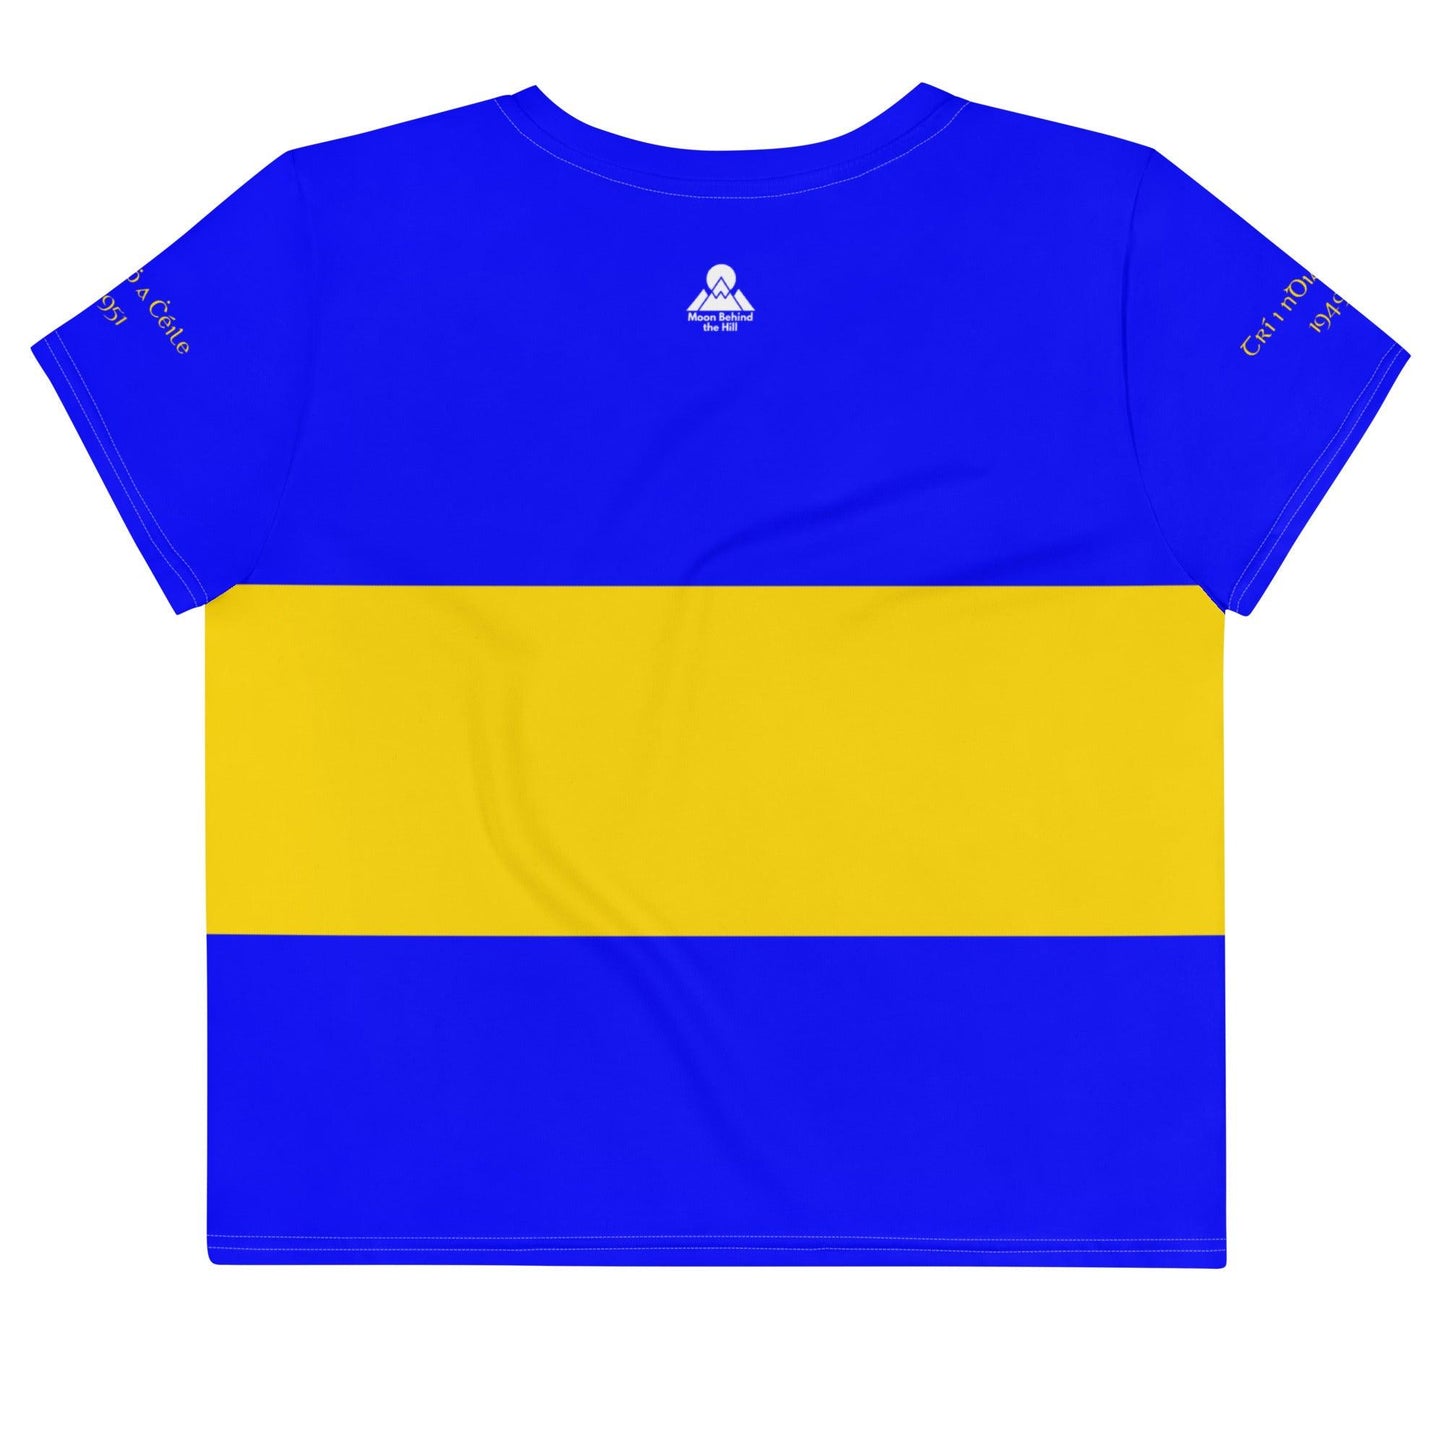 Women's Tipperary 3 in Row 1951 Retro Supporters Crop Tee designed by Moon Behind The Hill available from Moon Behind The Hill's Custom Made Apparel range